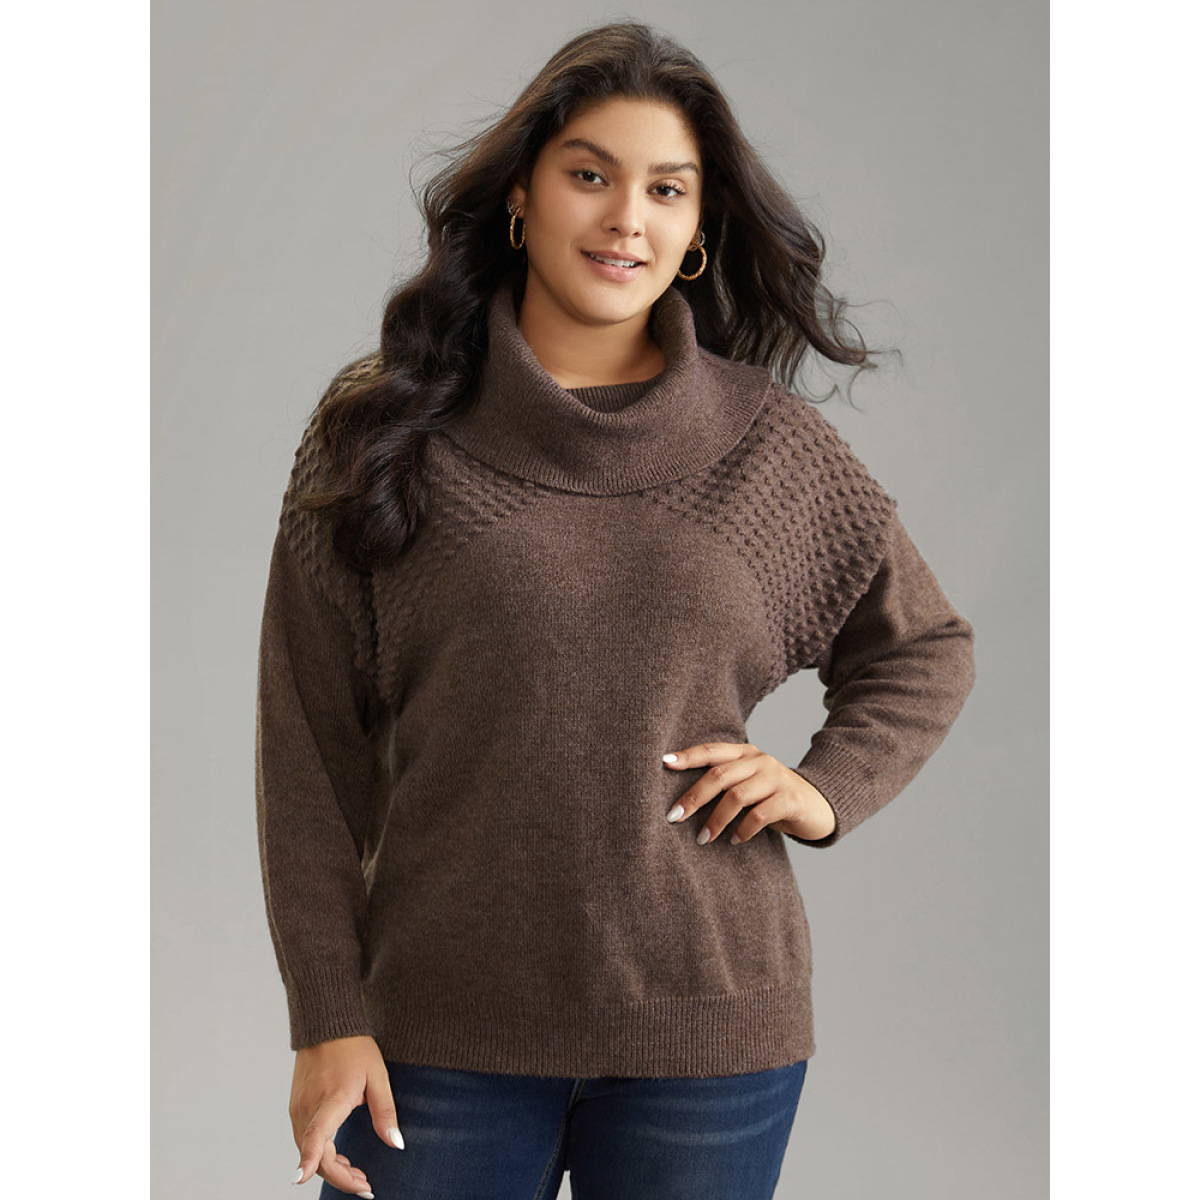 

Plus Size Supersoft Essentials Solid Textured Turtleneck Pullover DarkBrown Women Casual Loose Long Sleeve Turtleneck Dailywear Pullovers BloomChic